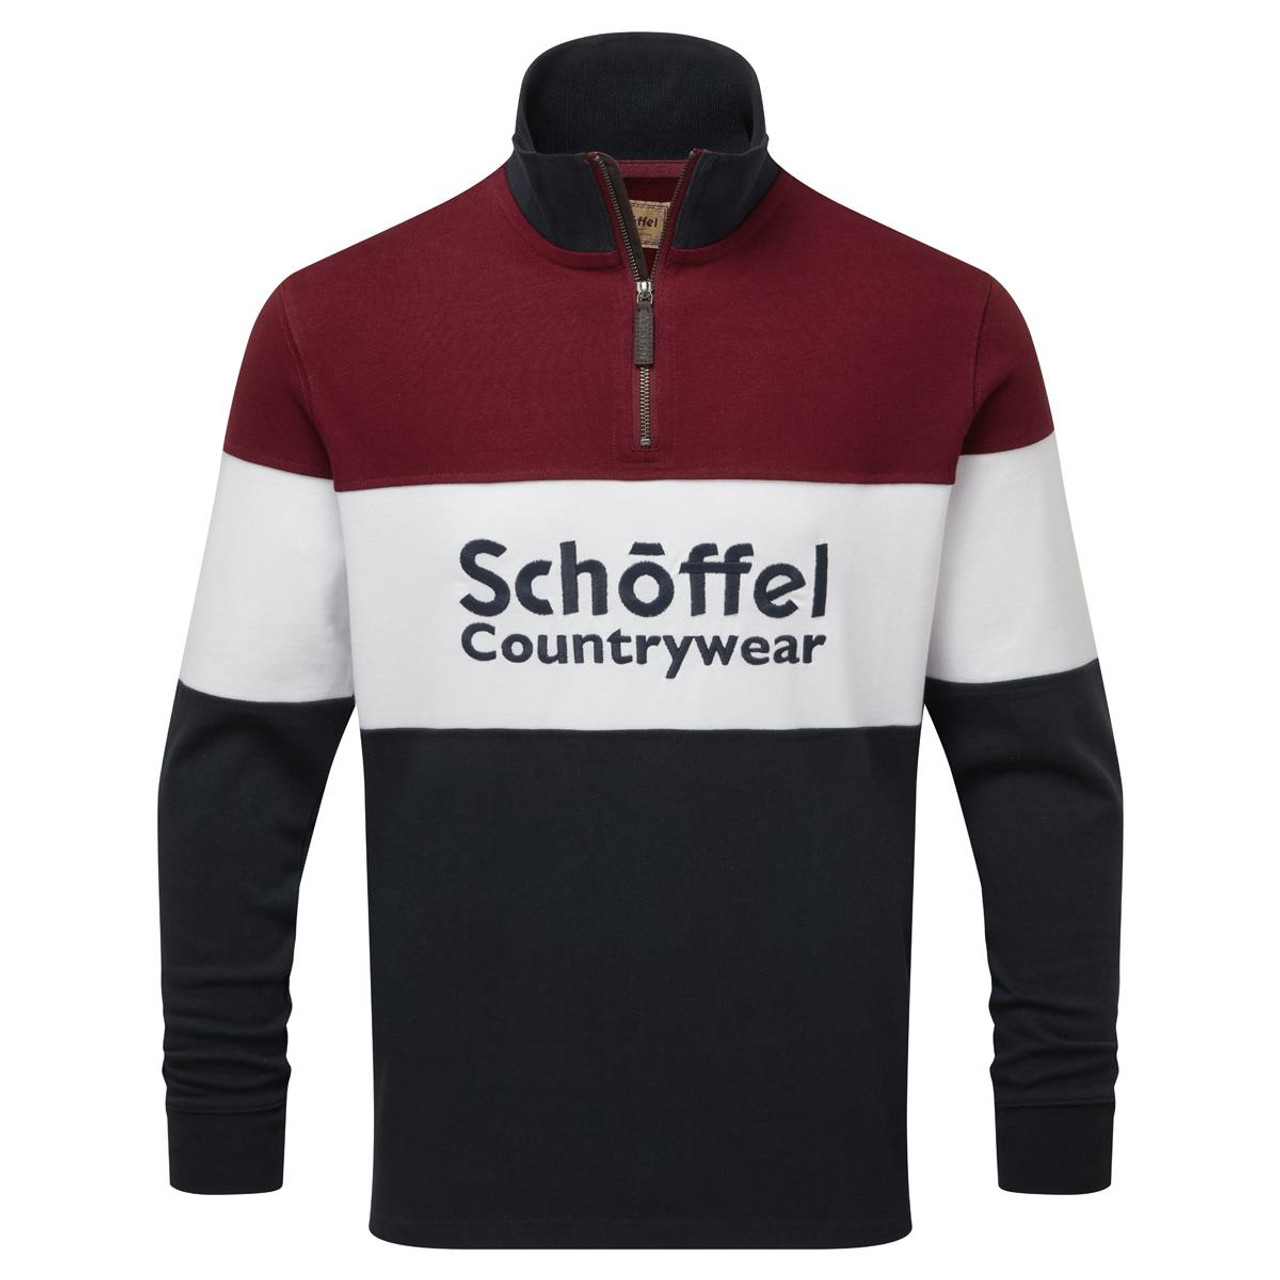 Can Schoffel Exeter be machine washed?